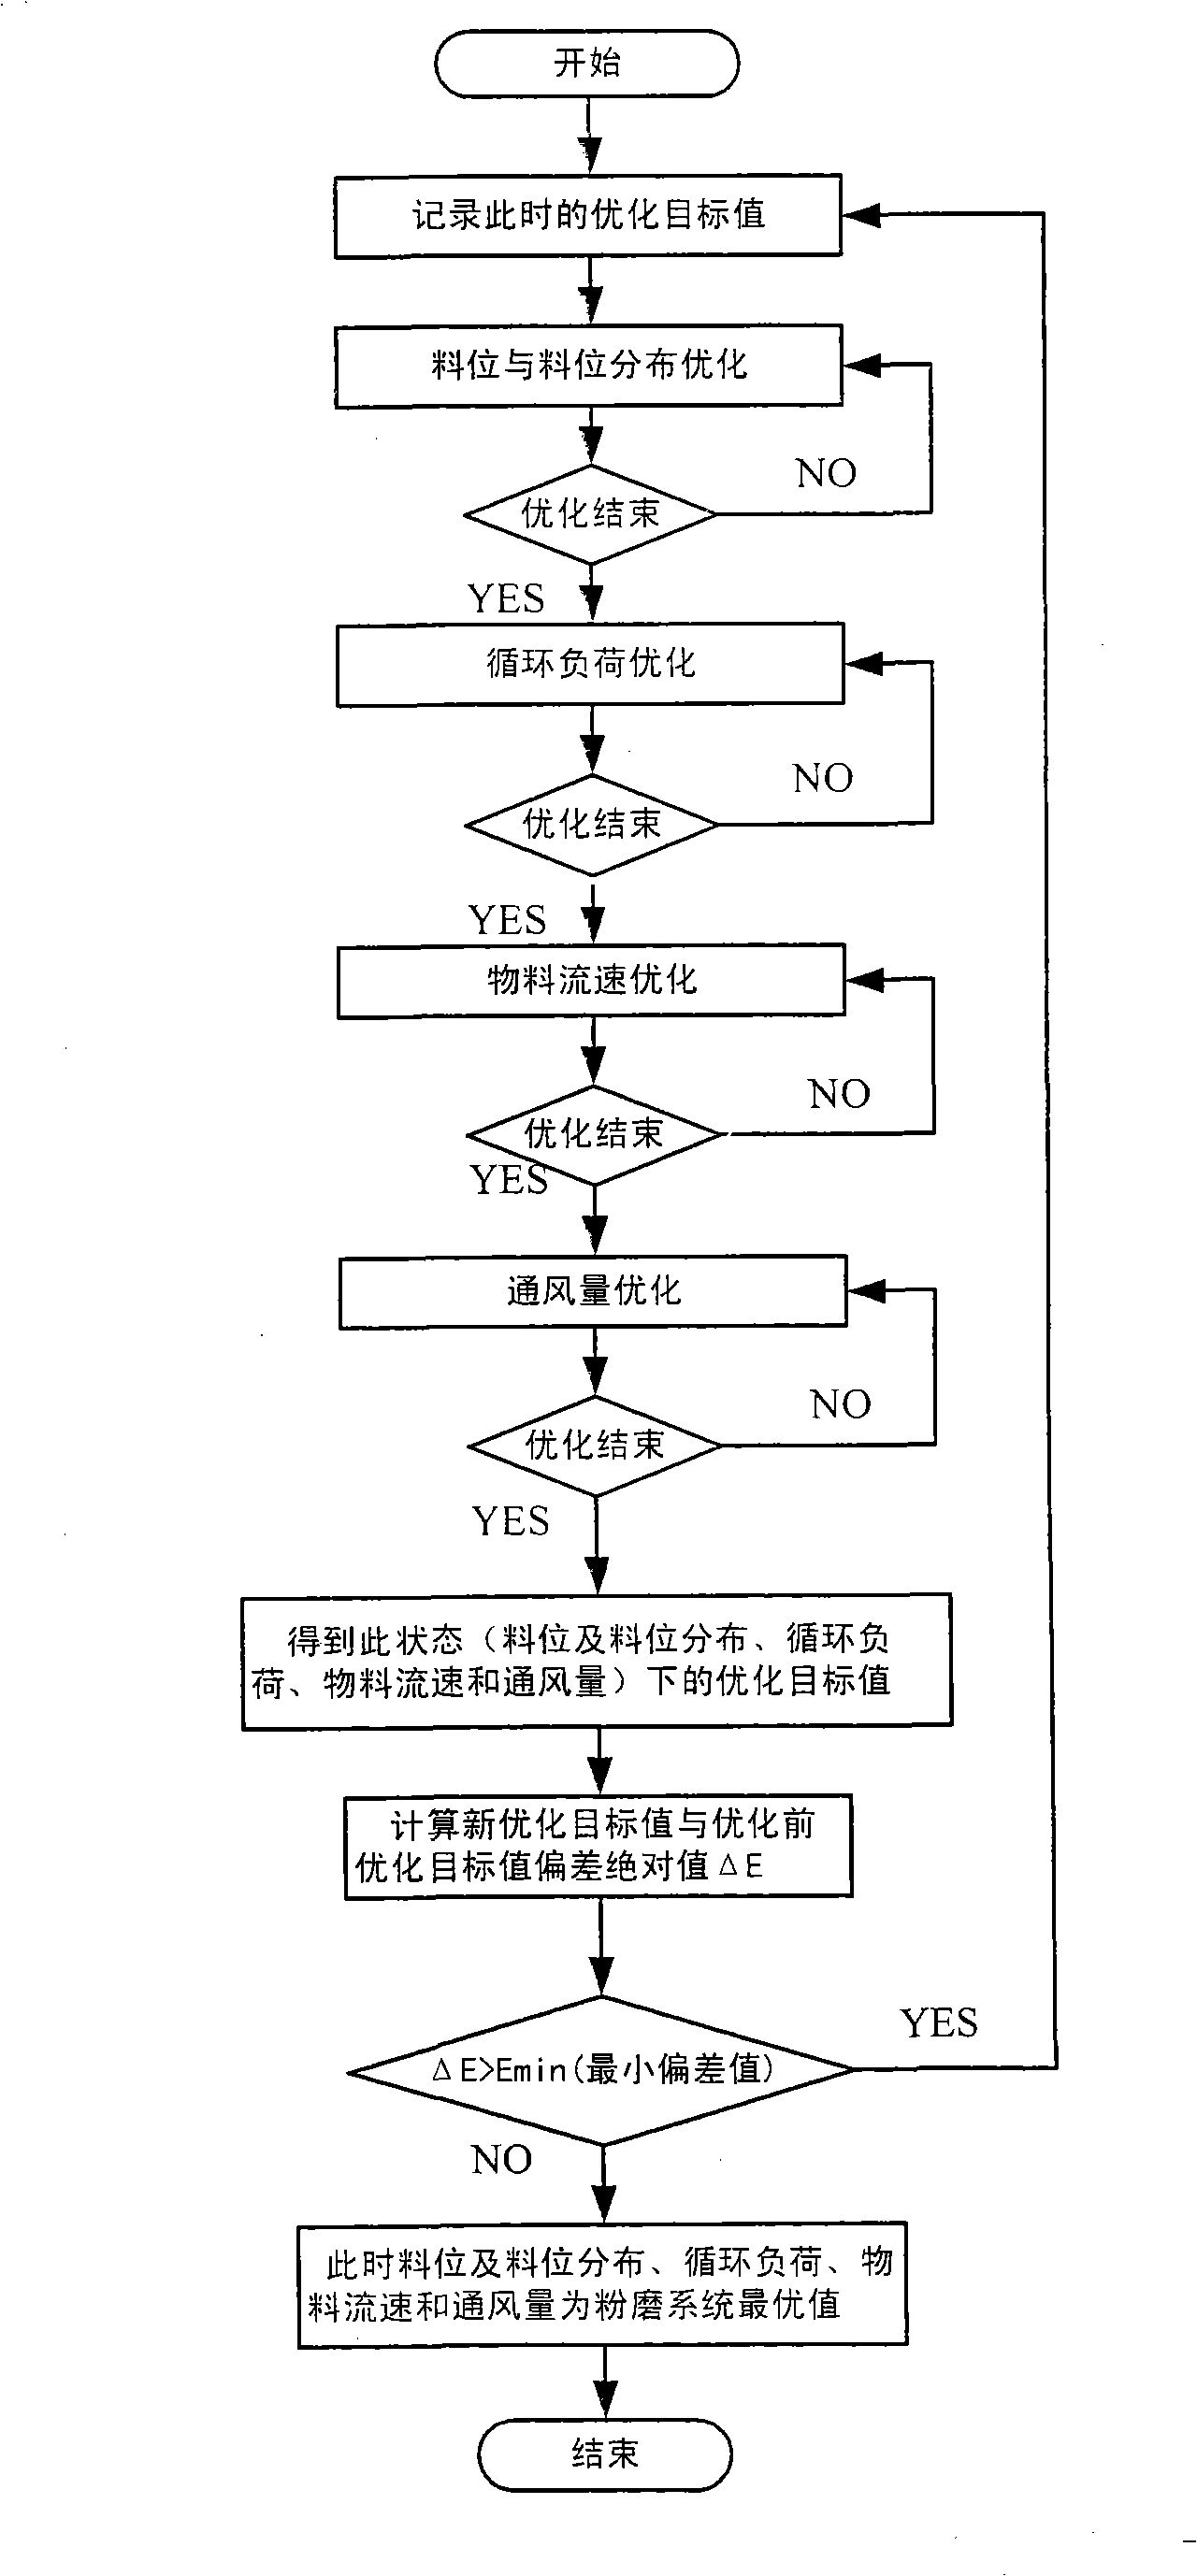 Control method for grinding process optimization of cement factory